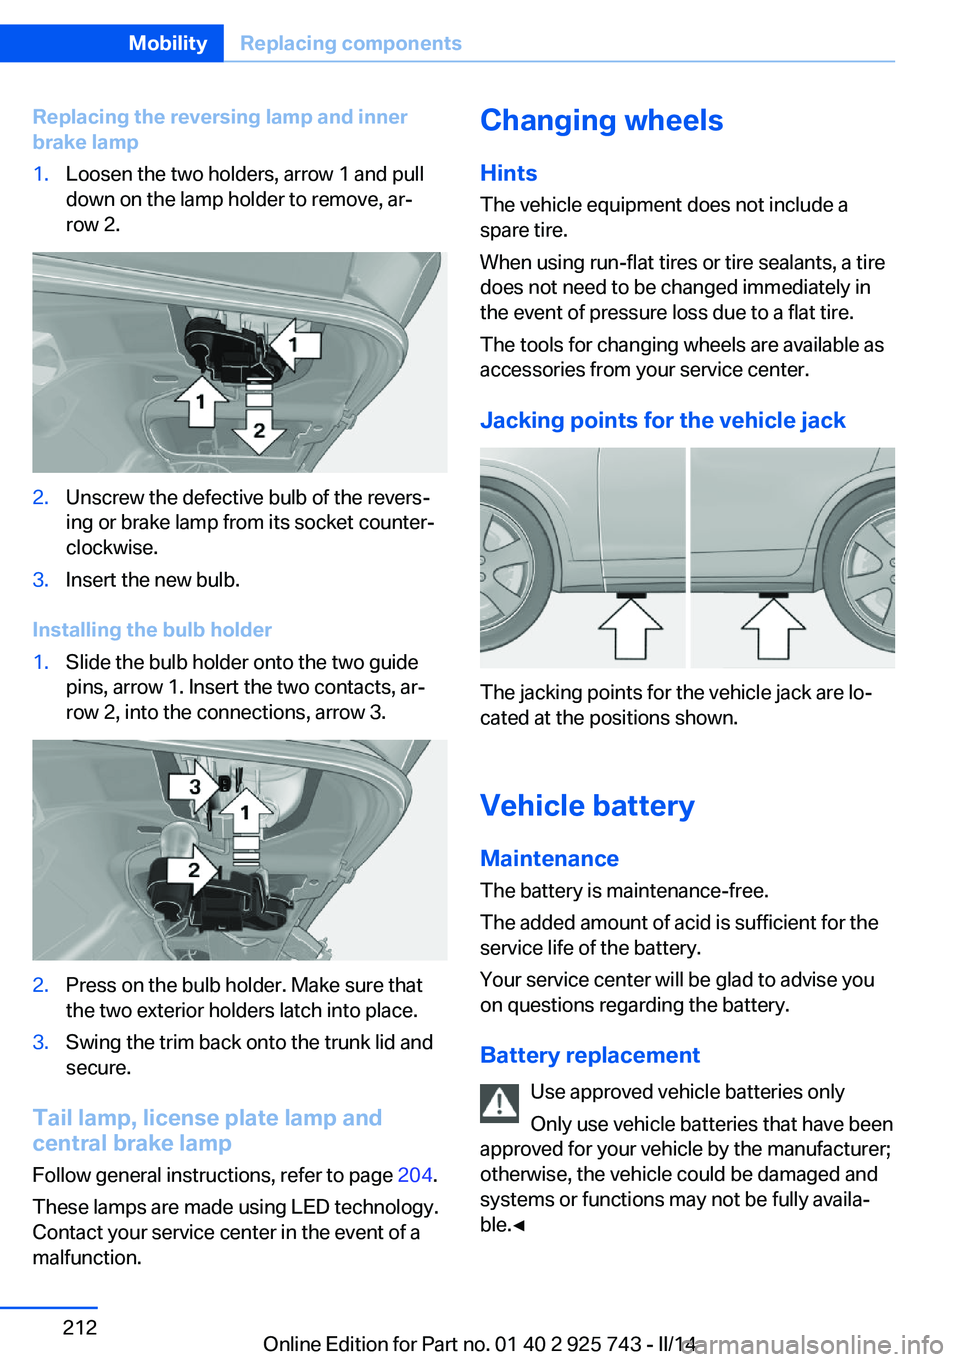 BMW 328D 2014  Owners Manual Replacing the reversing lamp and inner
brake lamp1.Loosen the two holders, arrow 1 and pull
down on the lamp holder to remove, ar‐
row 2.2.Unscrew the defective bulb of the revers‐
ing or brake la